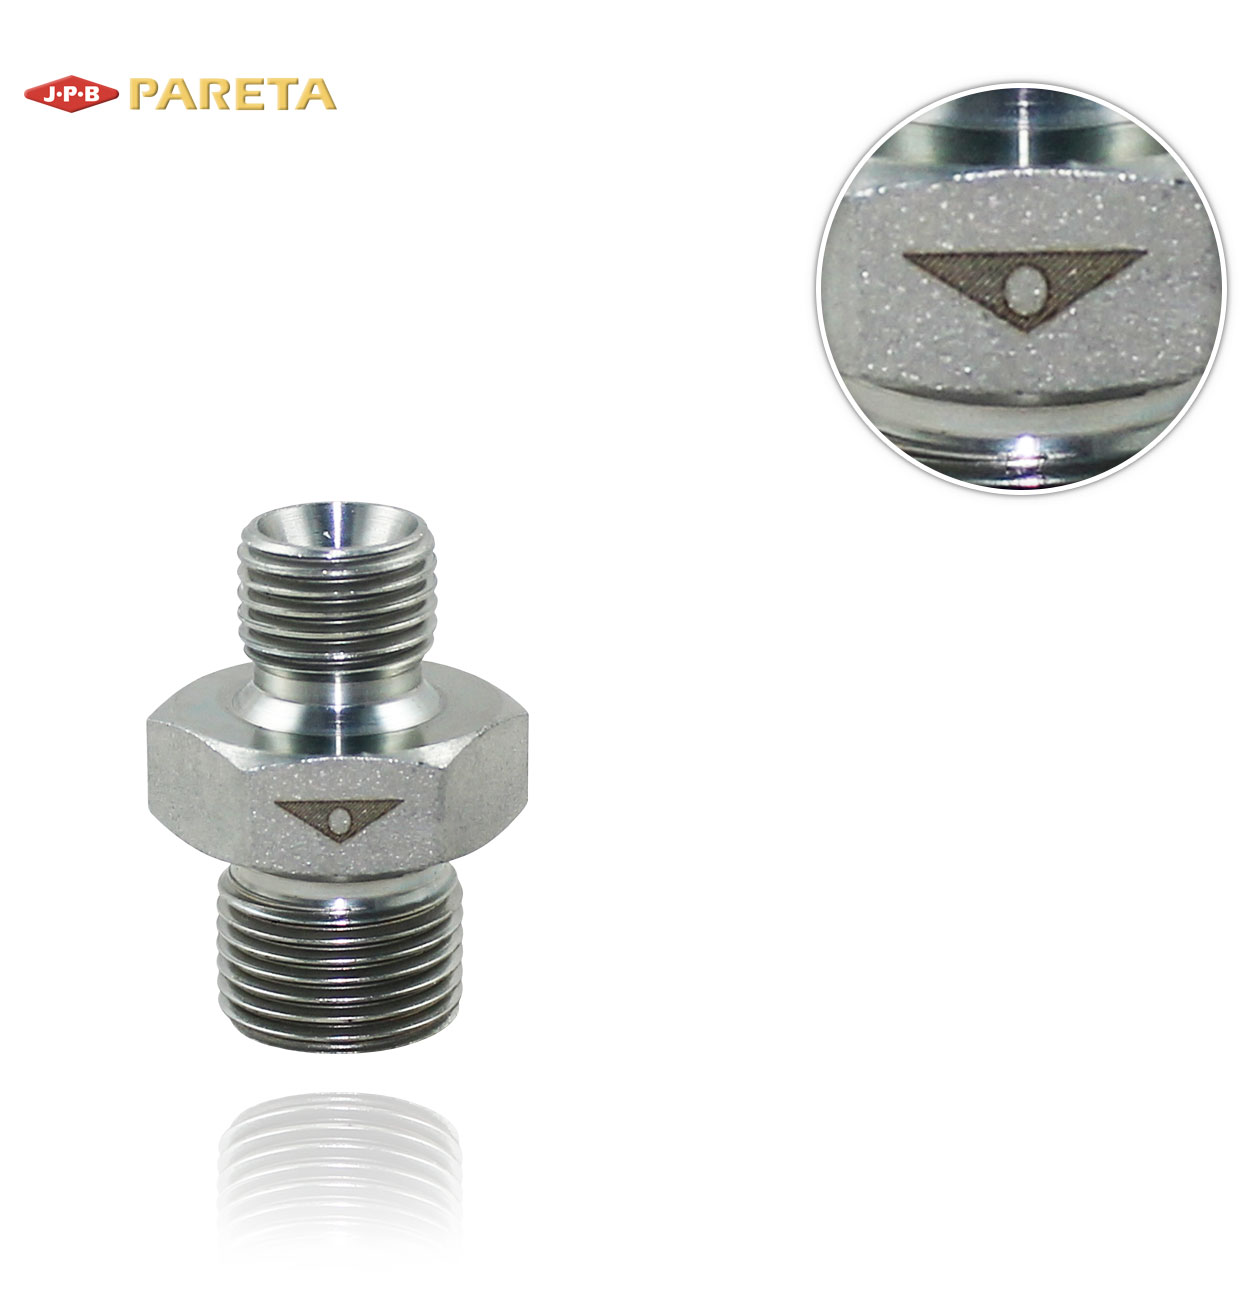 1/4"M x 3/8"M CONICAL CONNECTOR